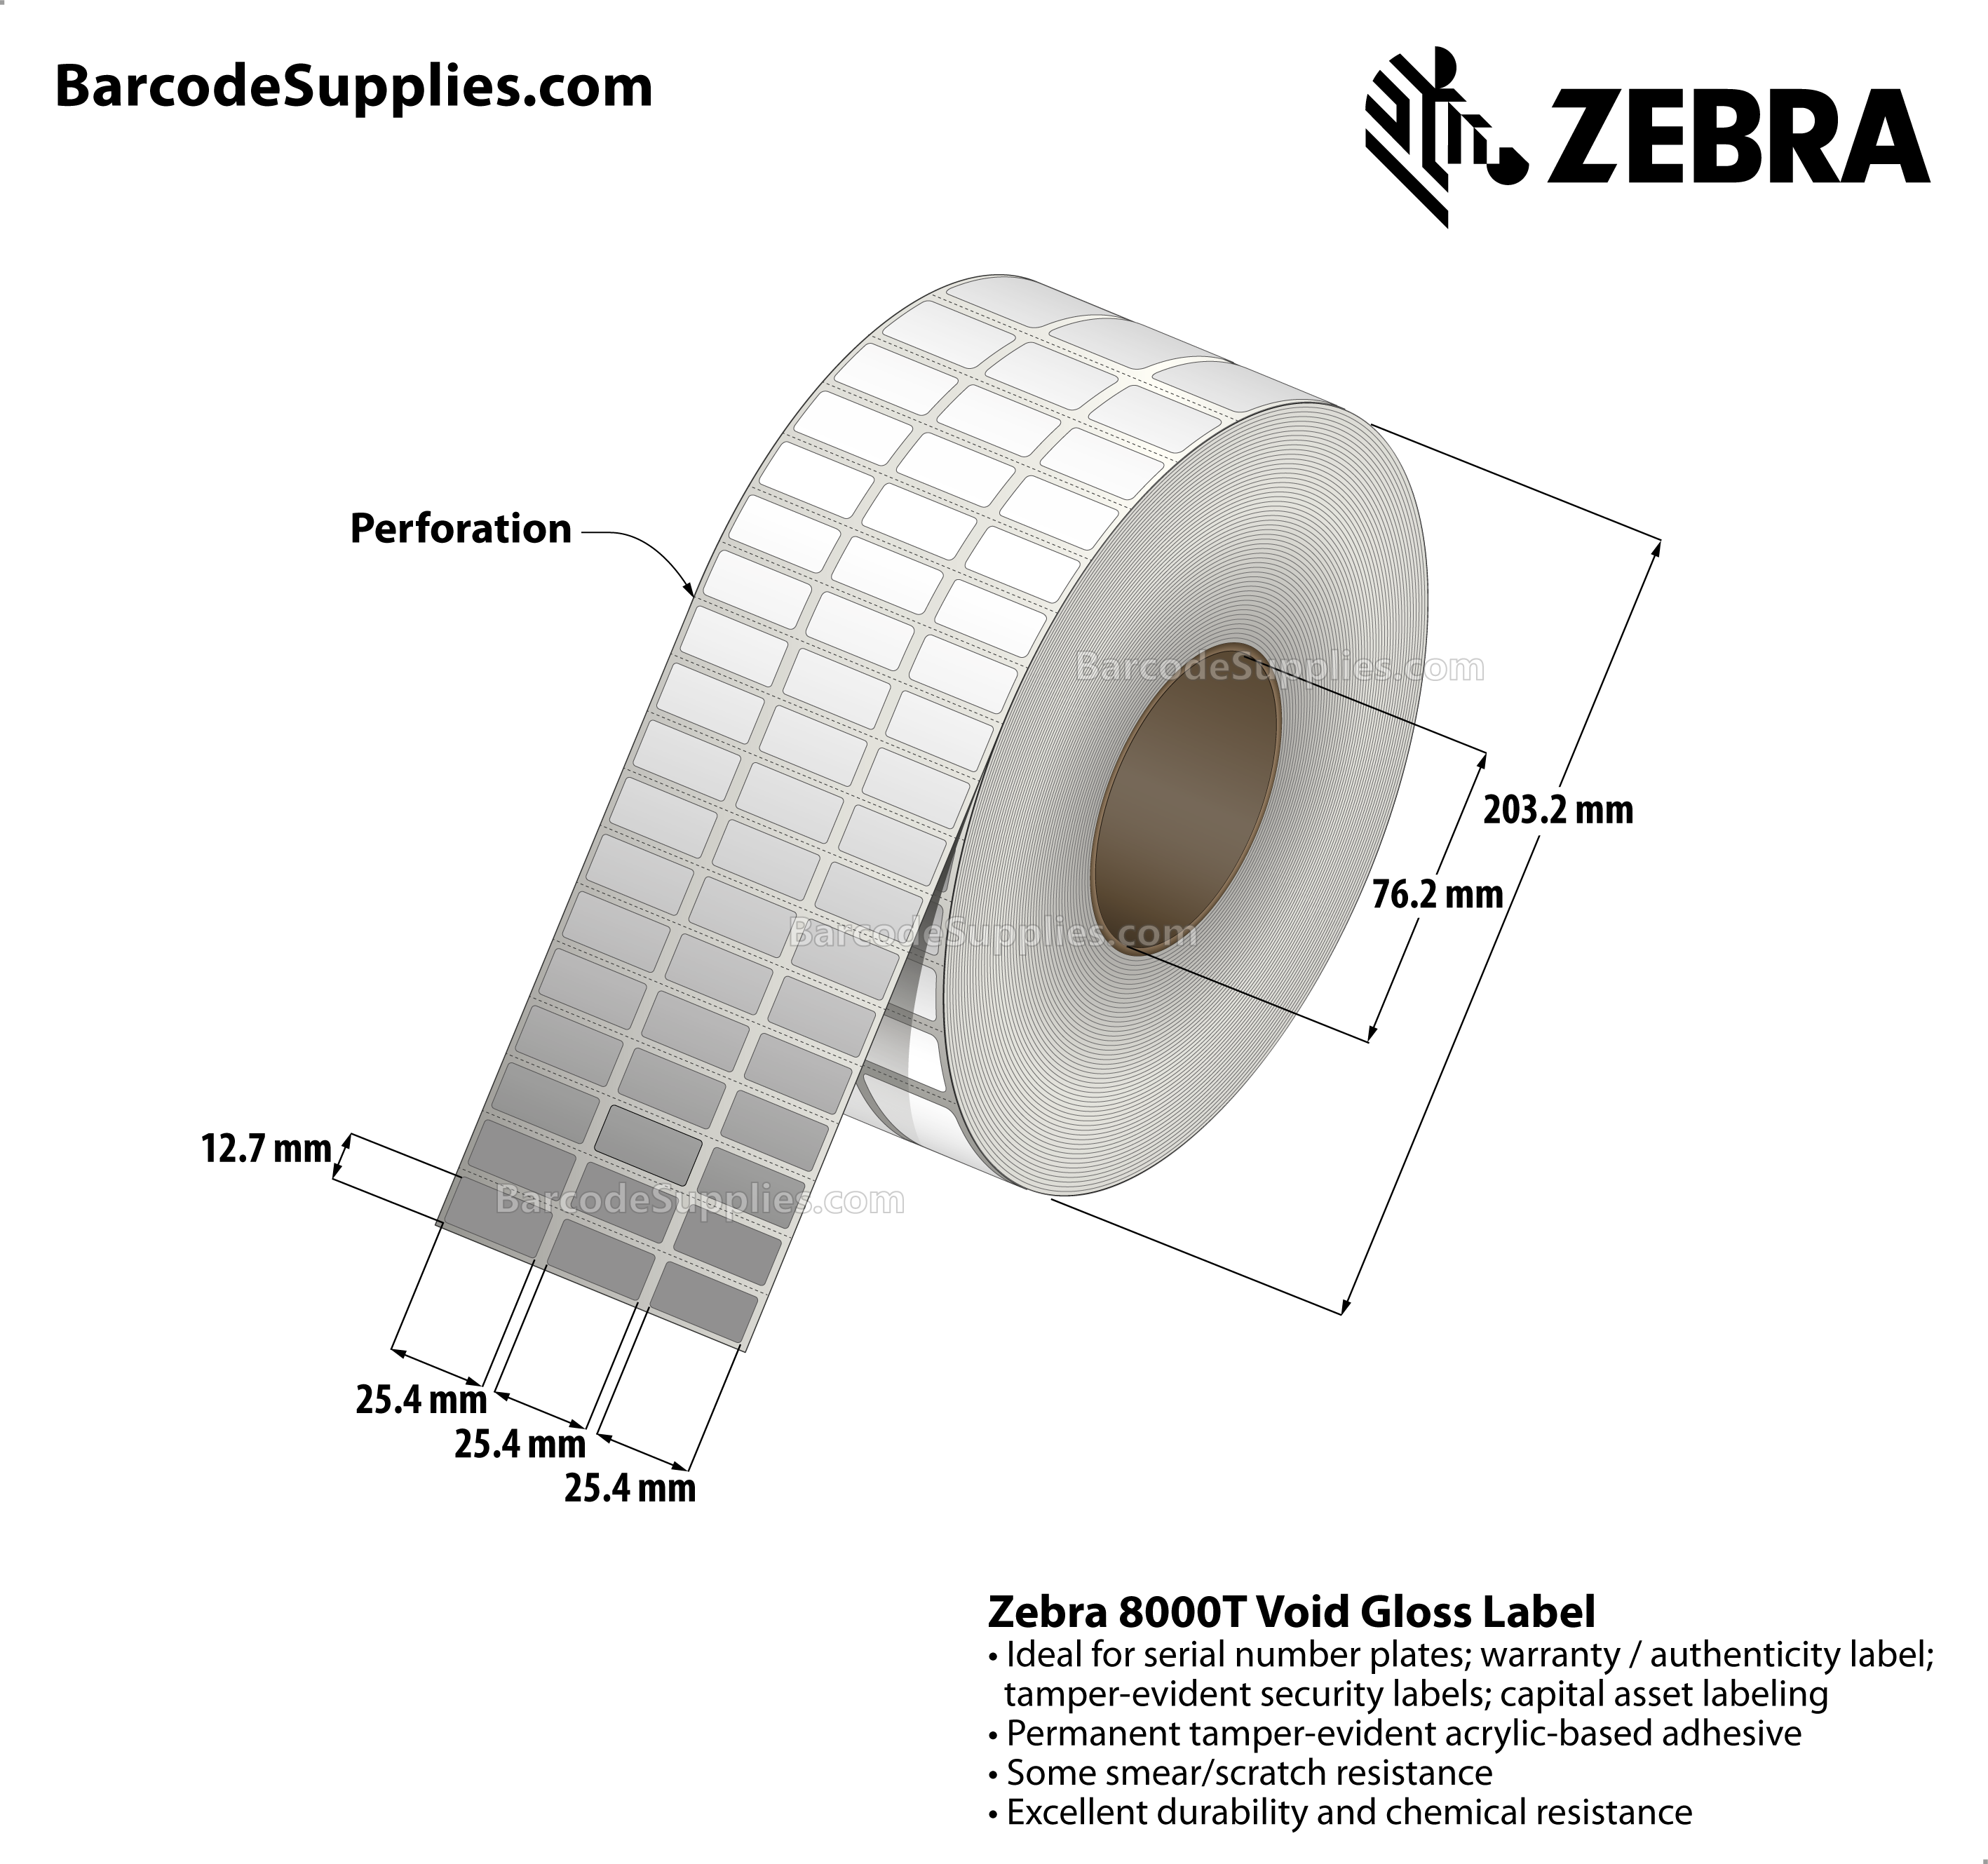 1 x 0.5 Thermal Transfer White 8000T Void Gloss (3-Across) Labels With Tamper-evident Adhesive - Perforated - 10002 Labels Per Roll - Carton Of 1 Rolls - 10002 Labels Total - MPN: 10023255